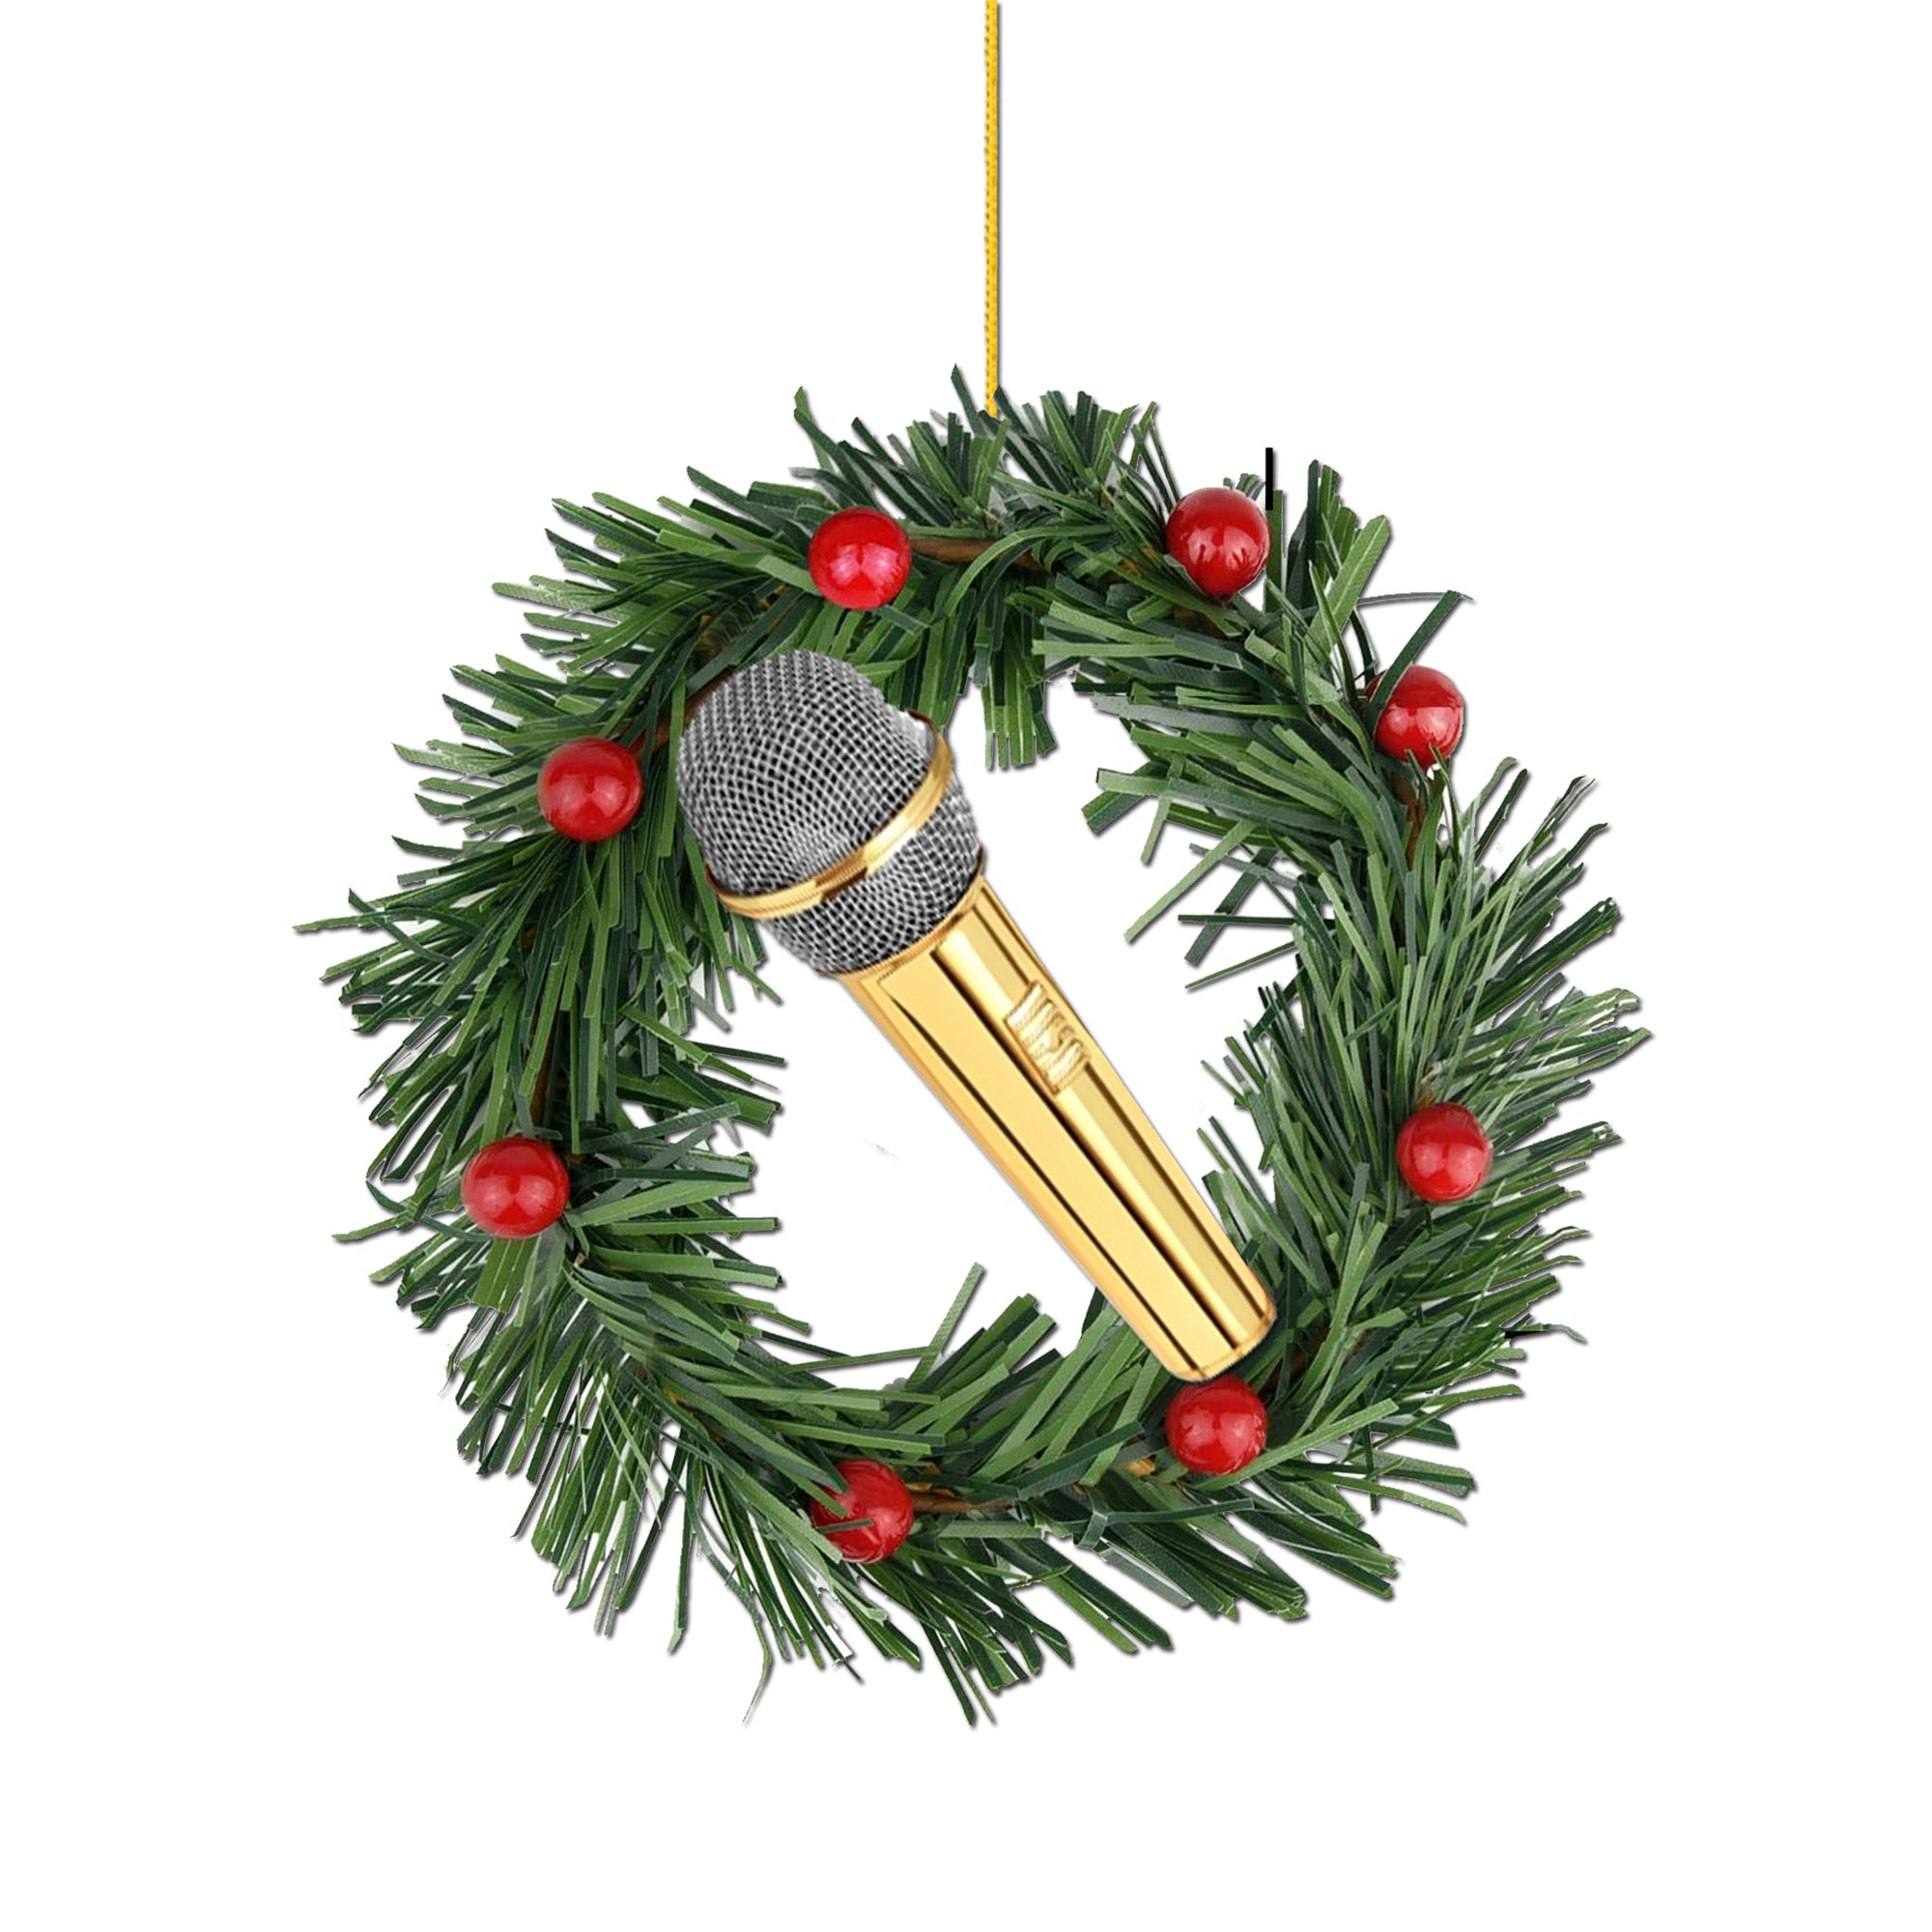 Singer's Microphone Christmas Ornament